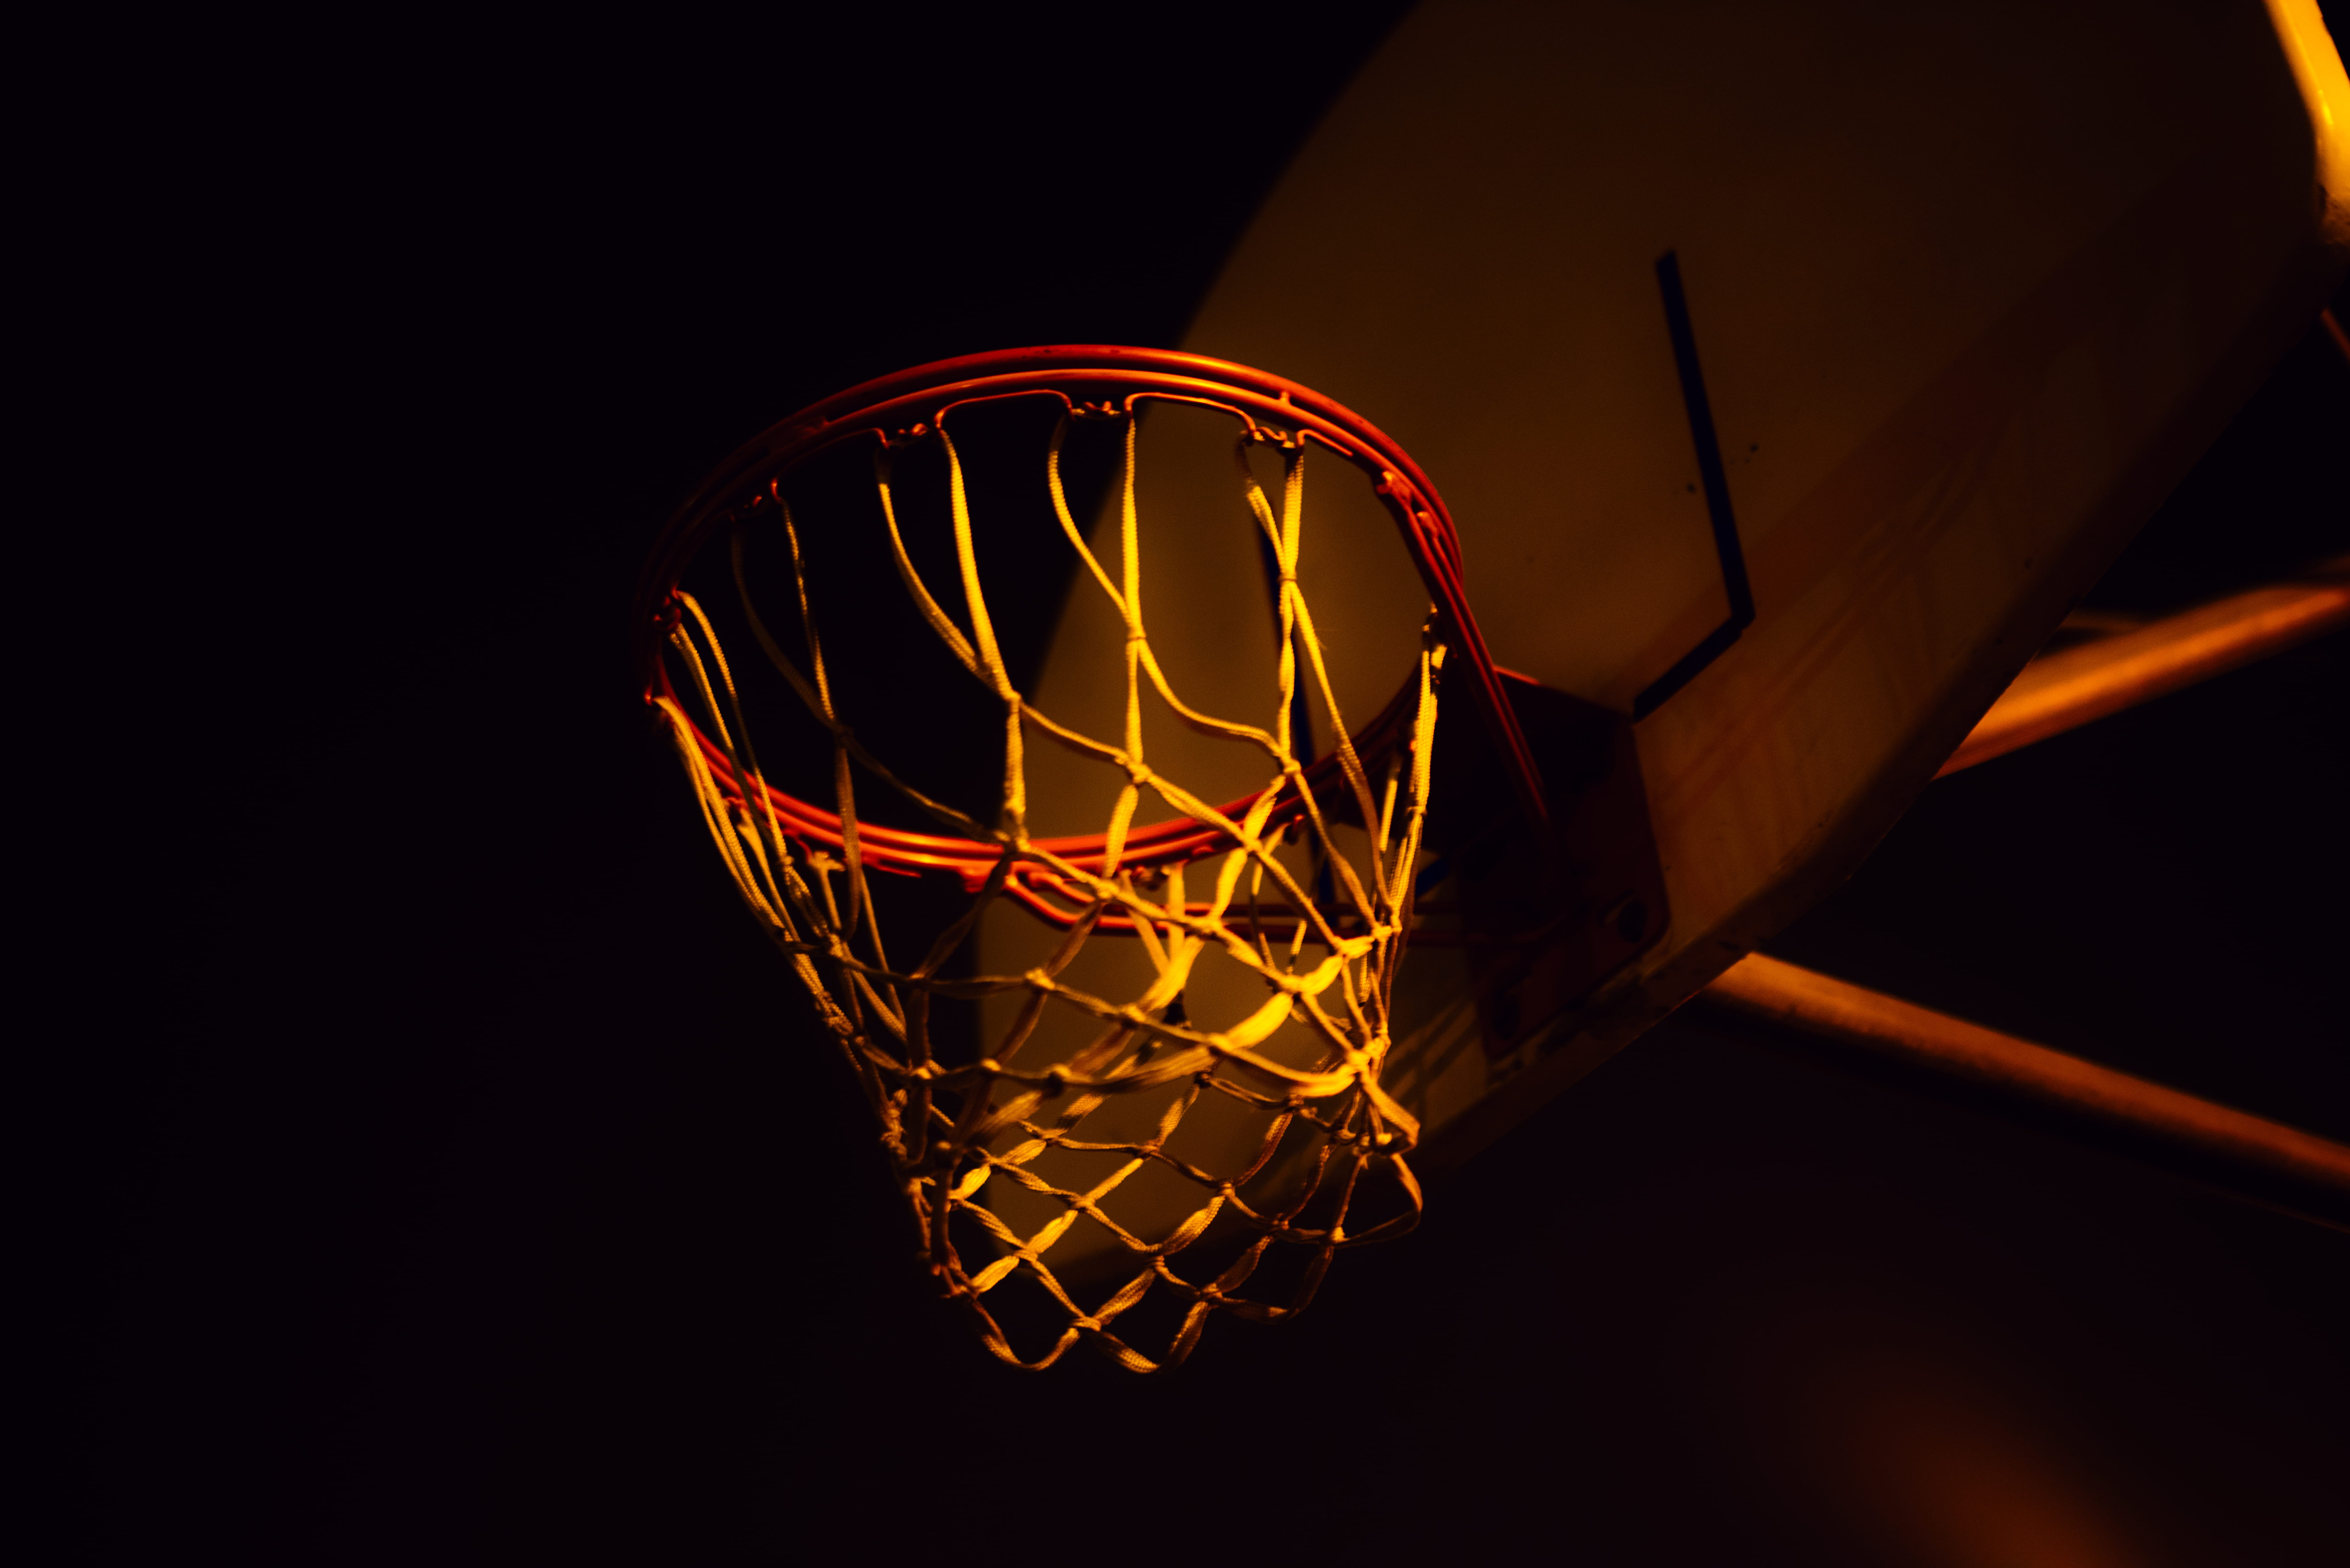 red and white basketball hoop with net, banister, handrail, lamp